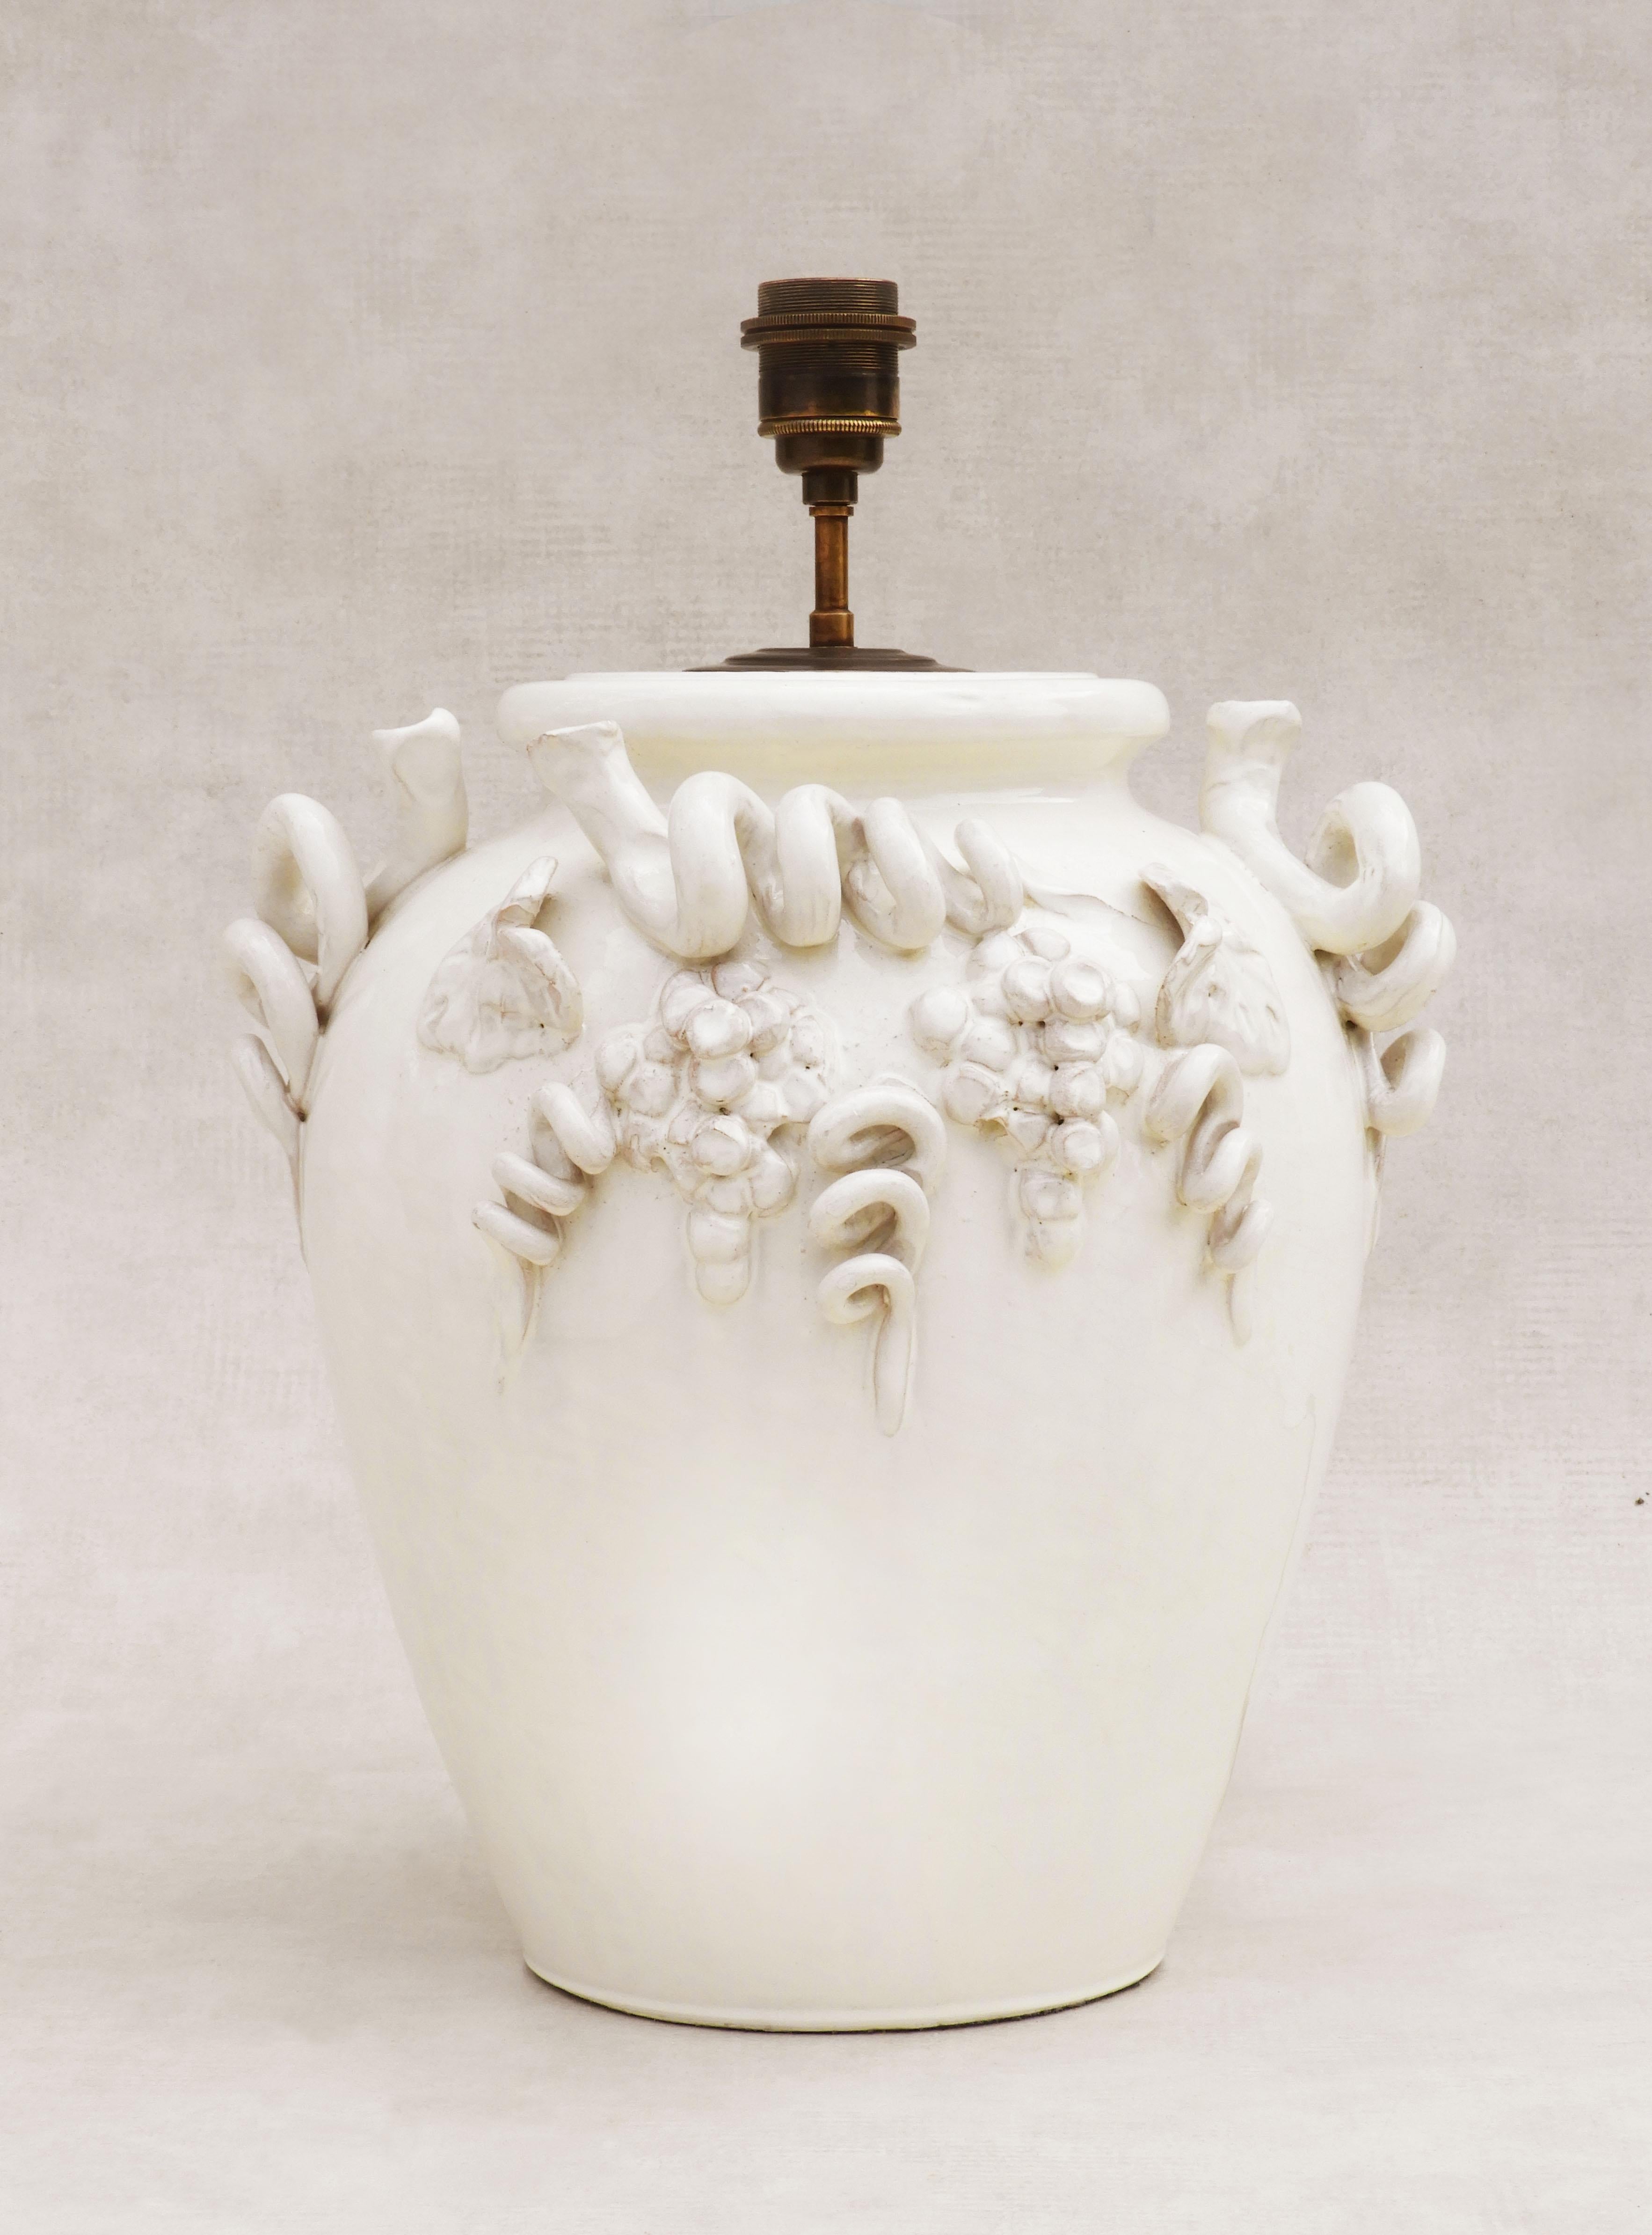 Charming wine-themed, white-glazed, terracotta table lamp C1980s France. Heavy, nicely proportioned, jar-shaped lamp, decorated in relief with grapes, leaves and vine tendrils and finished in a glossy white ceramic glaze. 
In good vintage